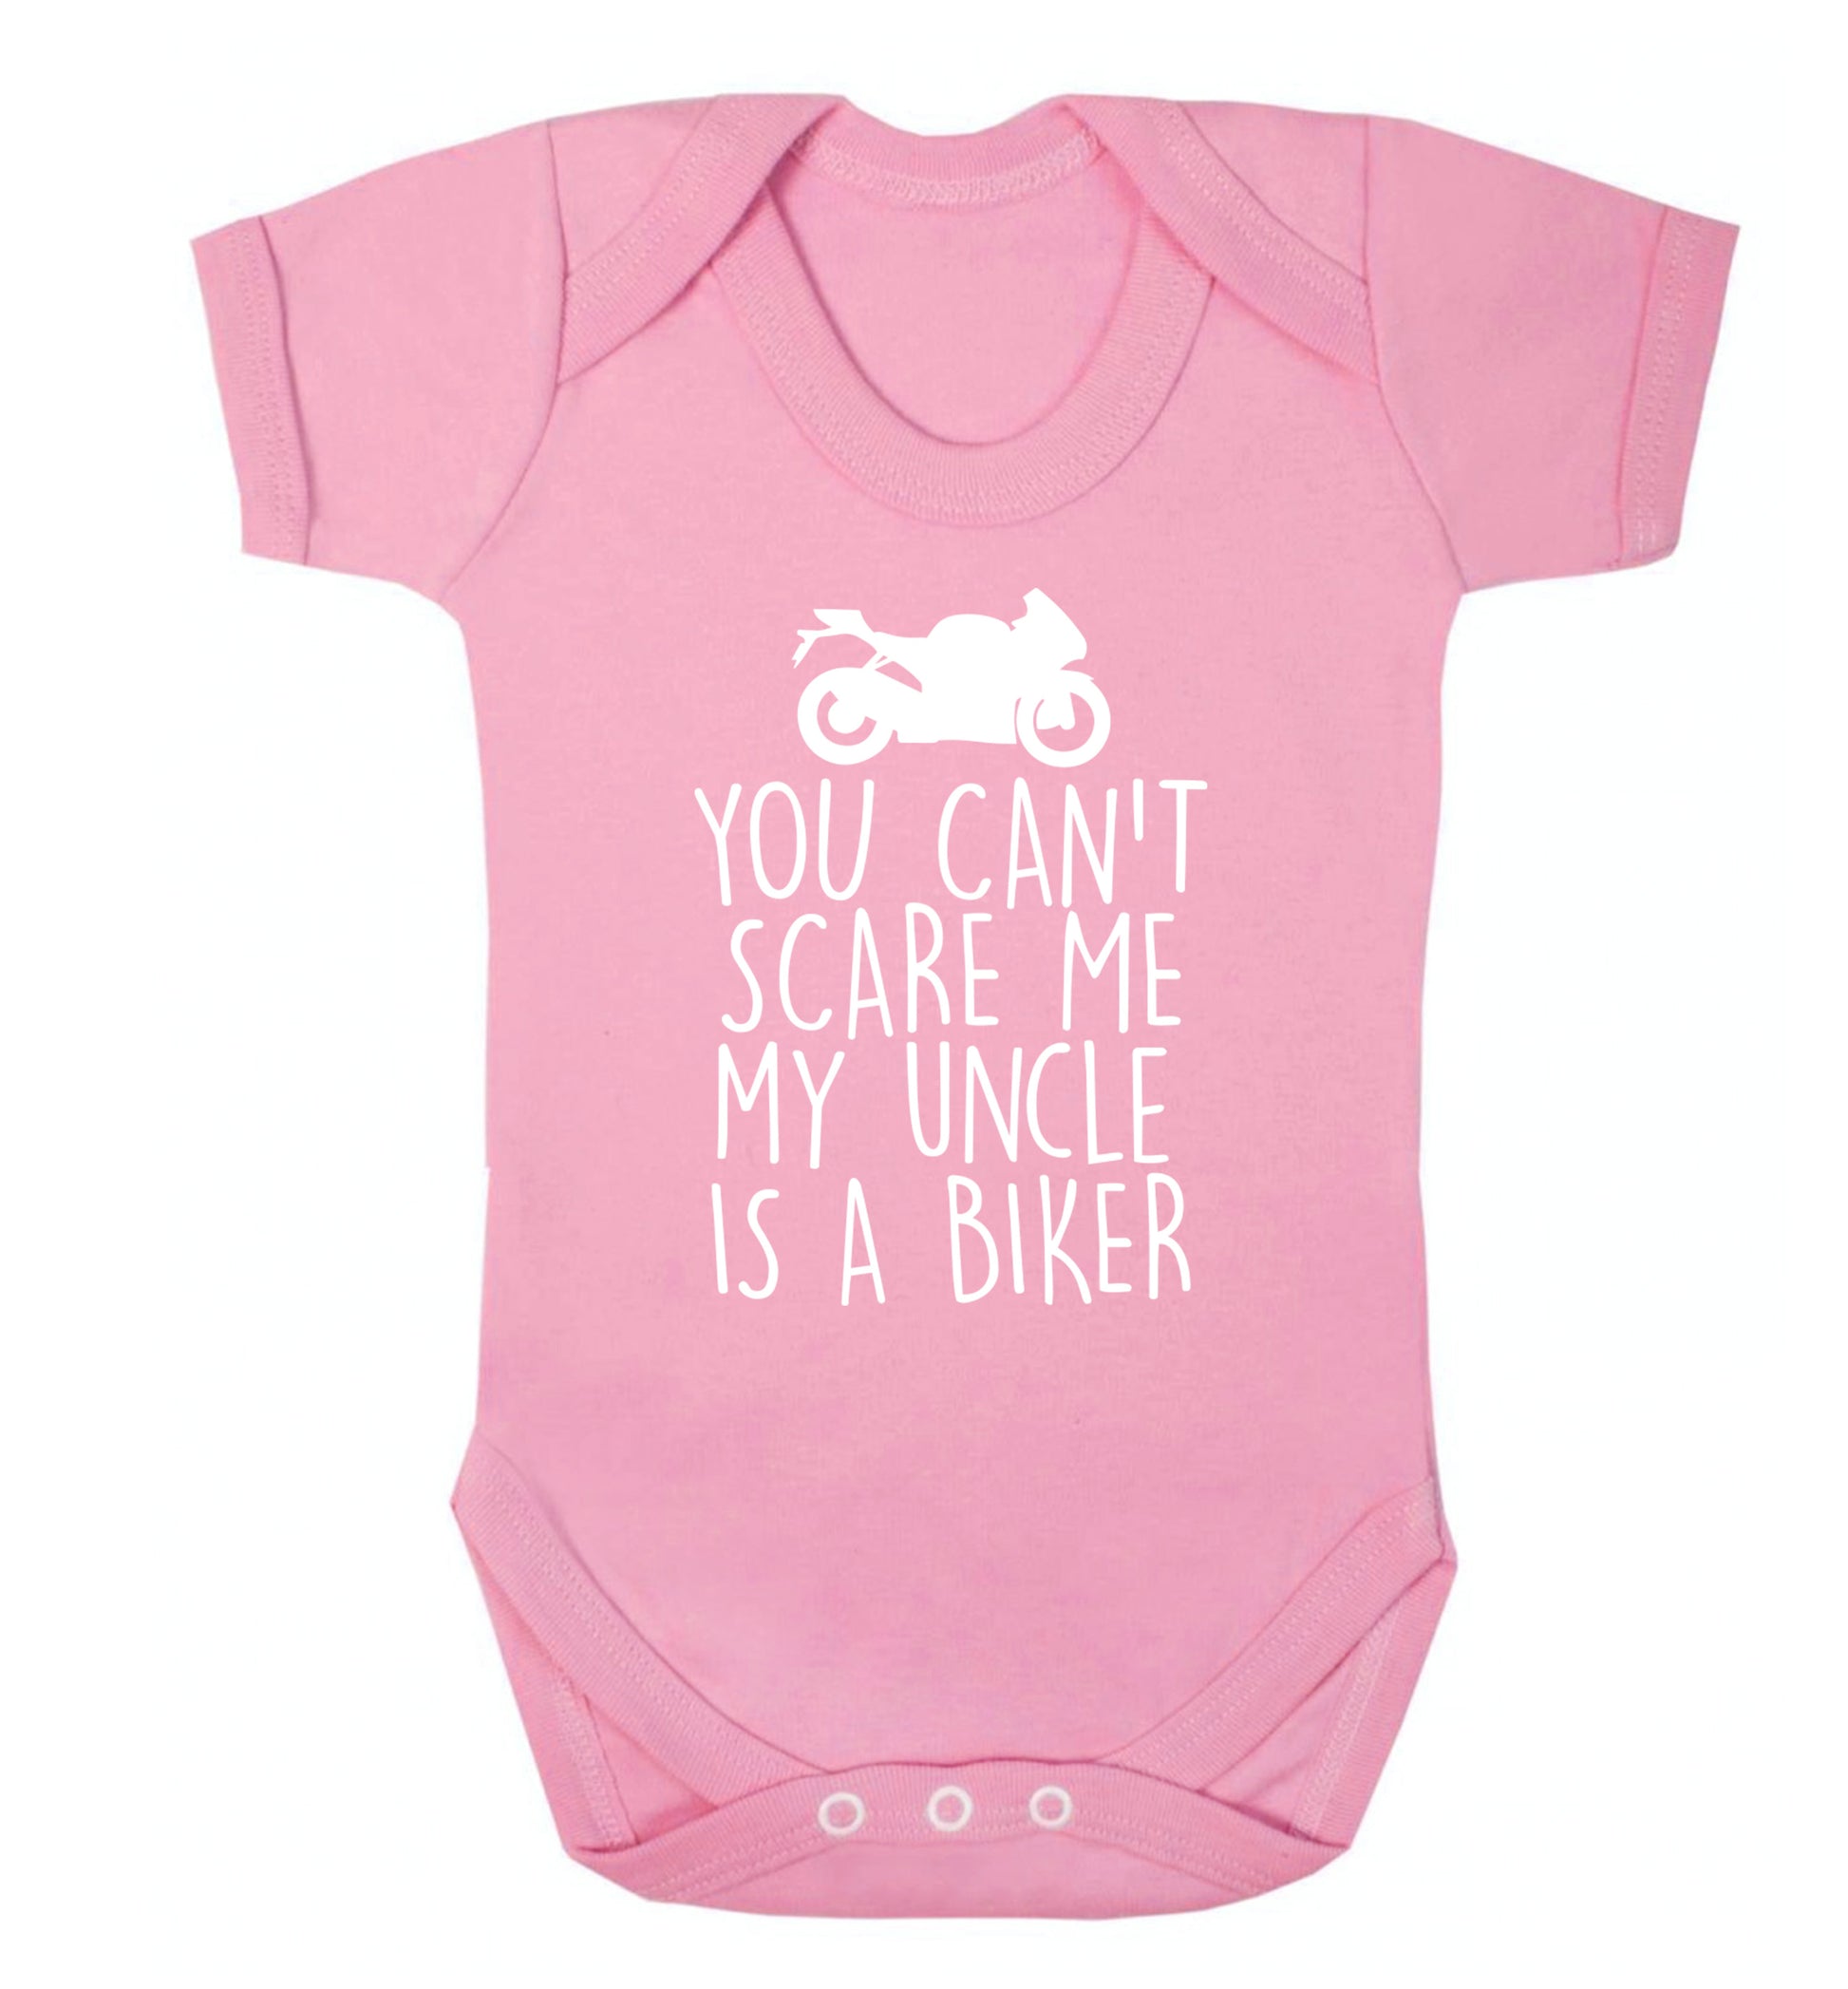 You can't scare me my uncle is a biker Baby Vest pale pink 18-24 months